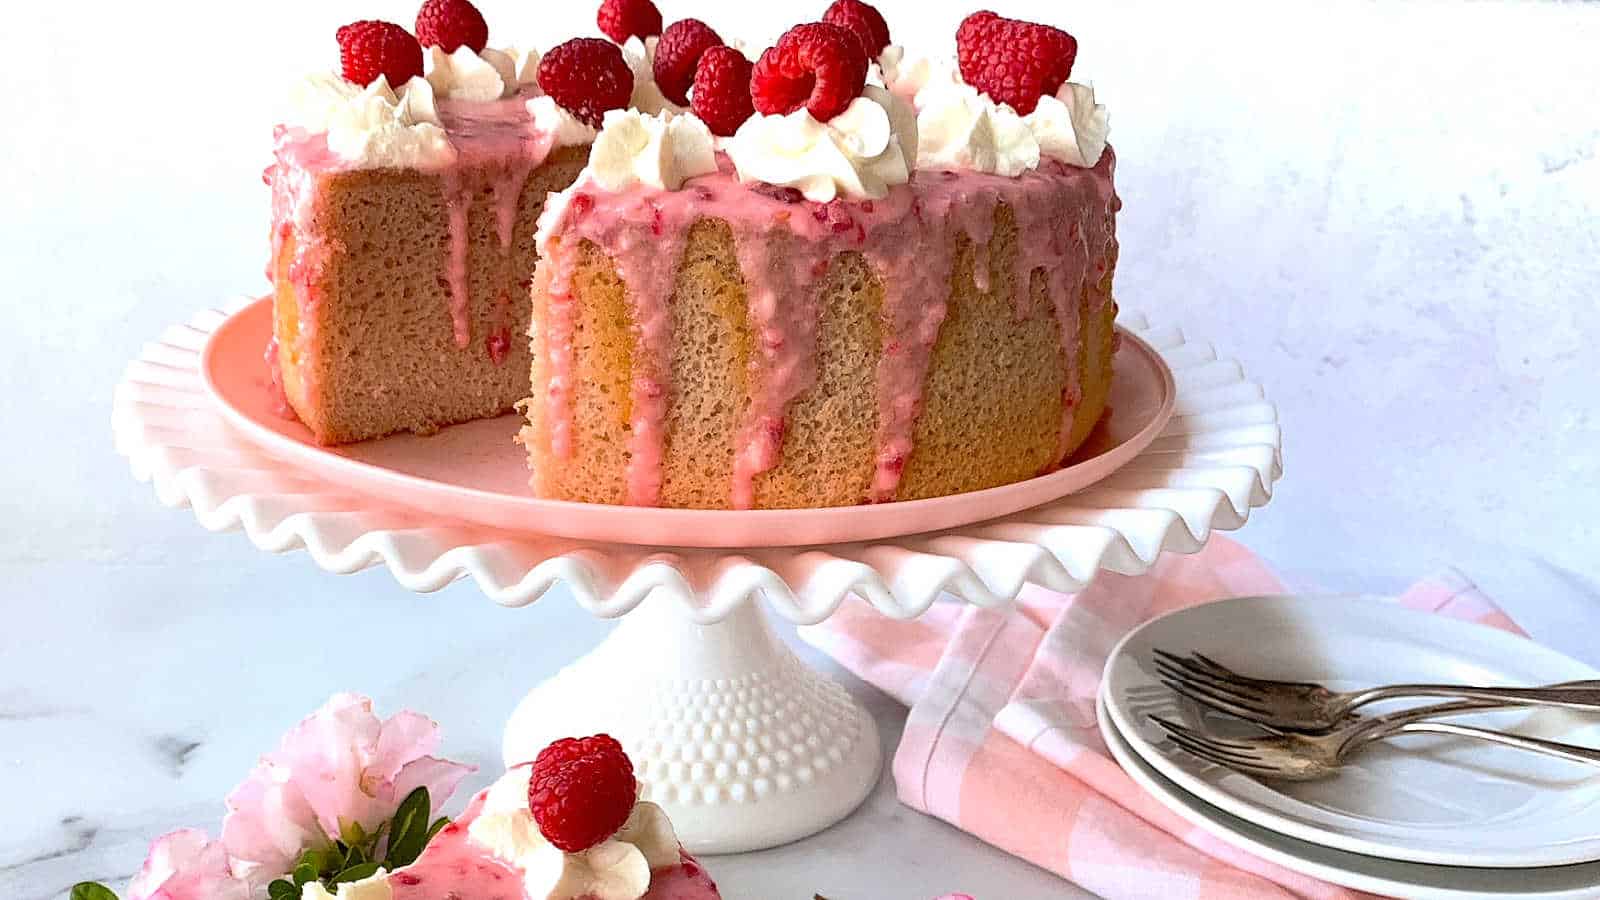 Raspberry cake on a white stand with plates and napkins.